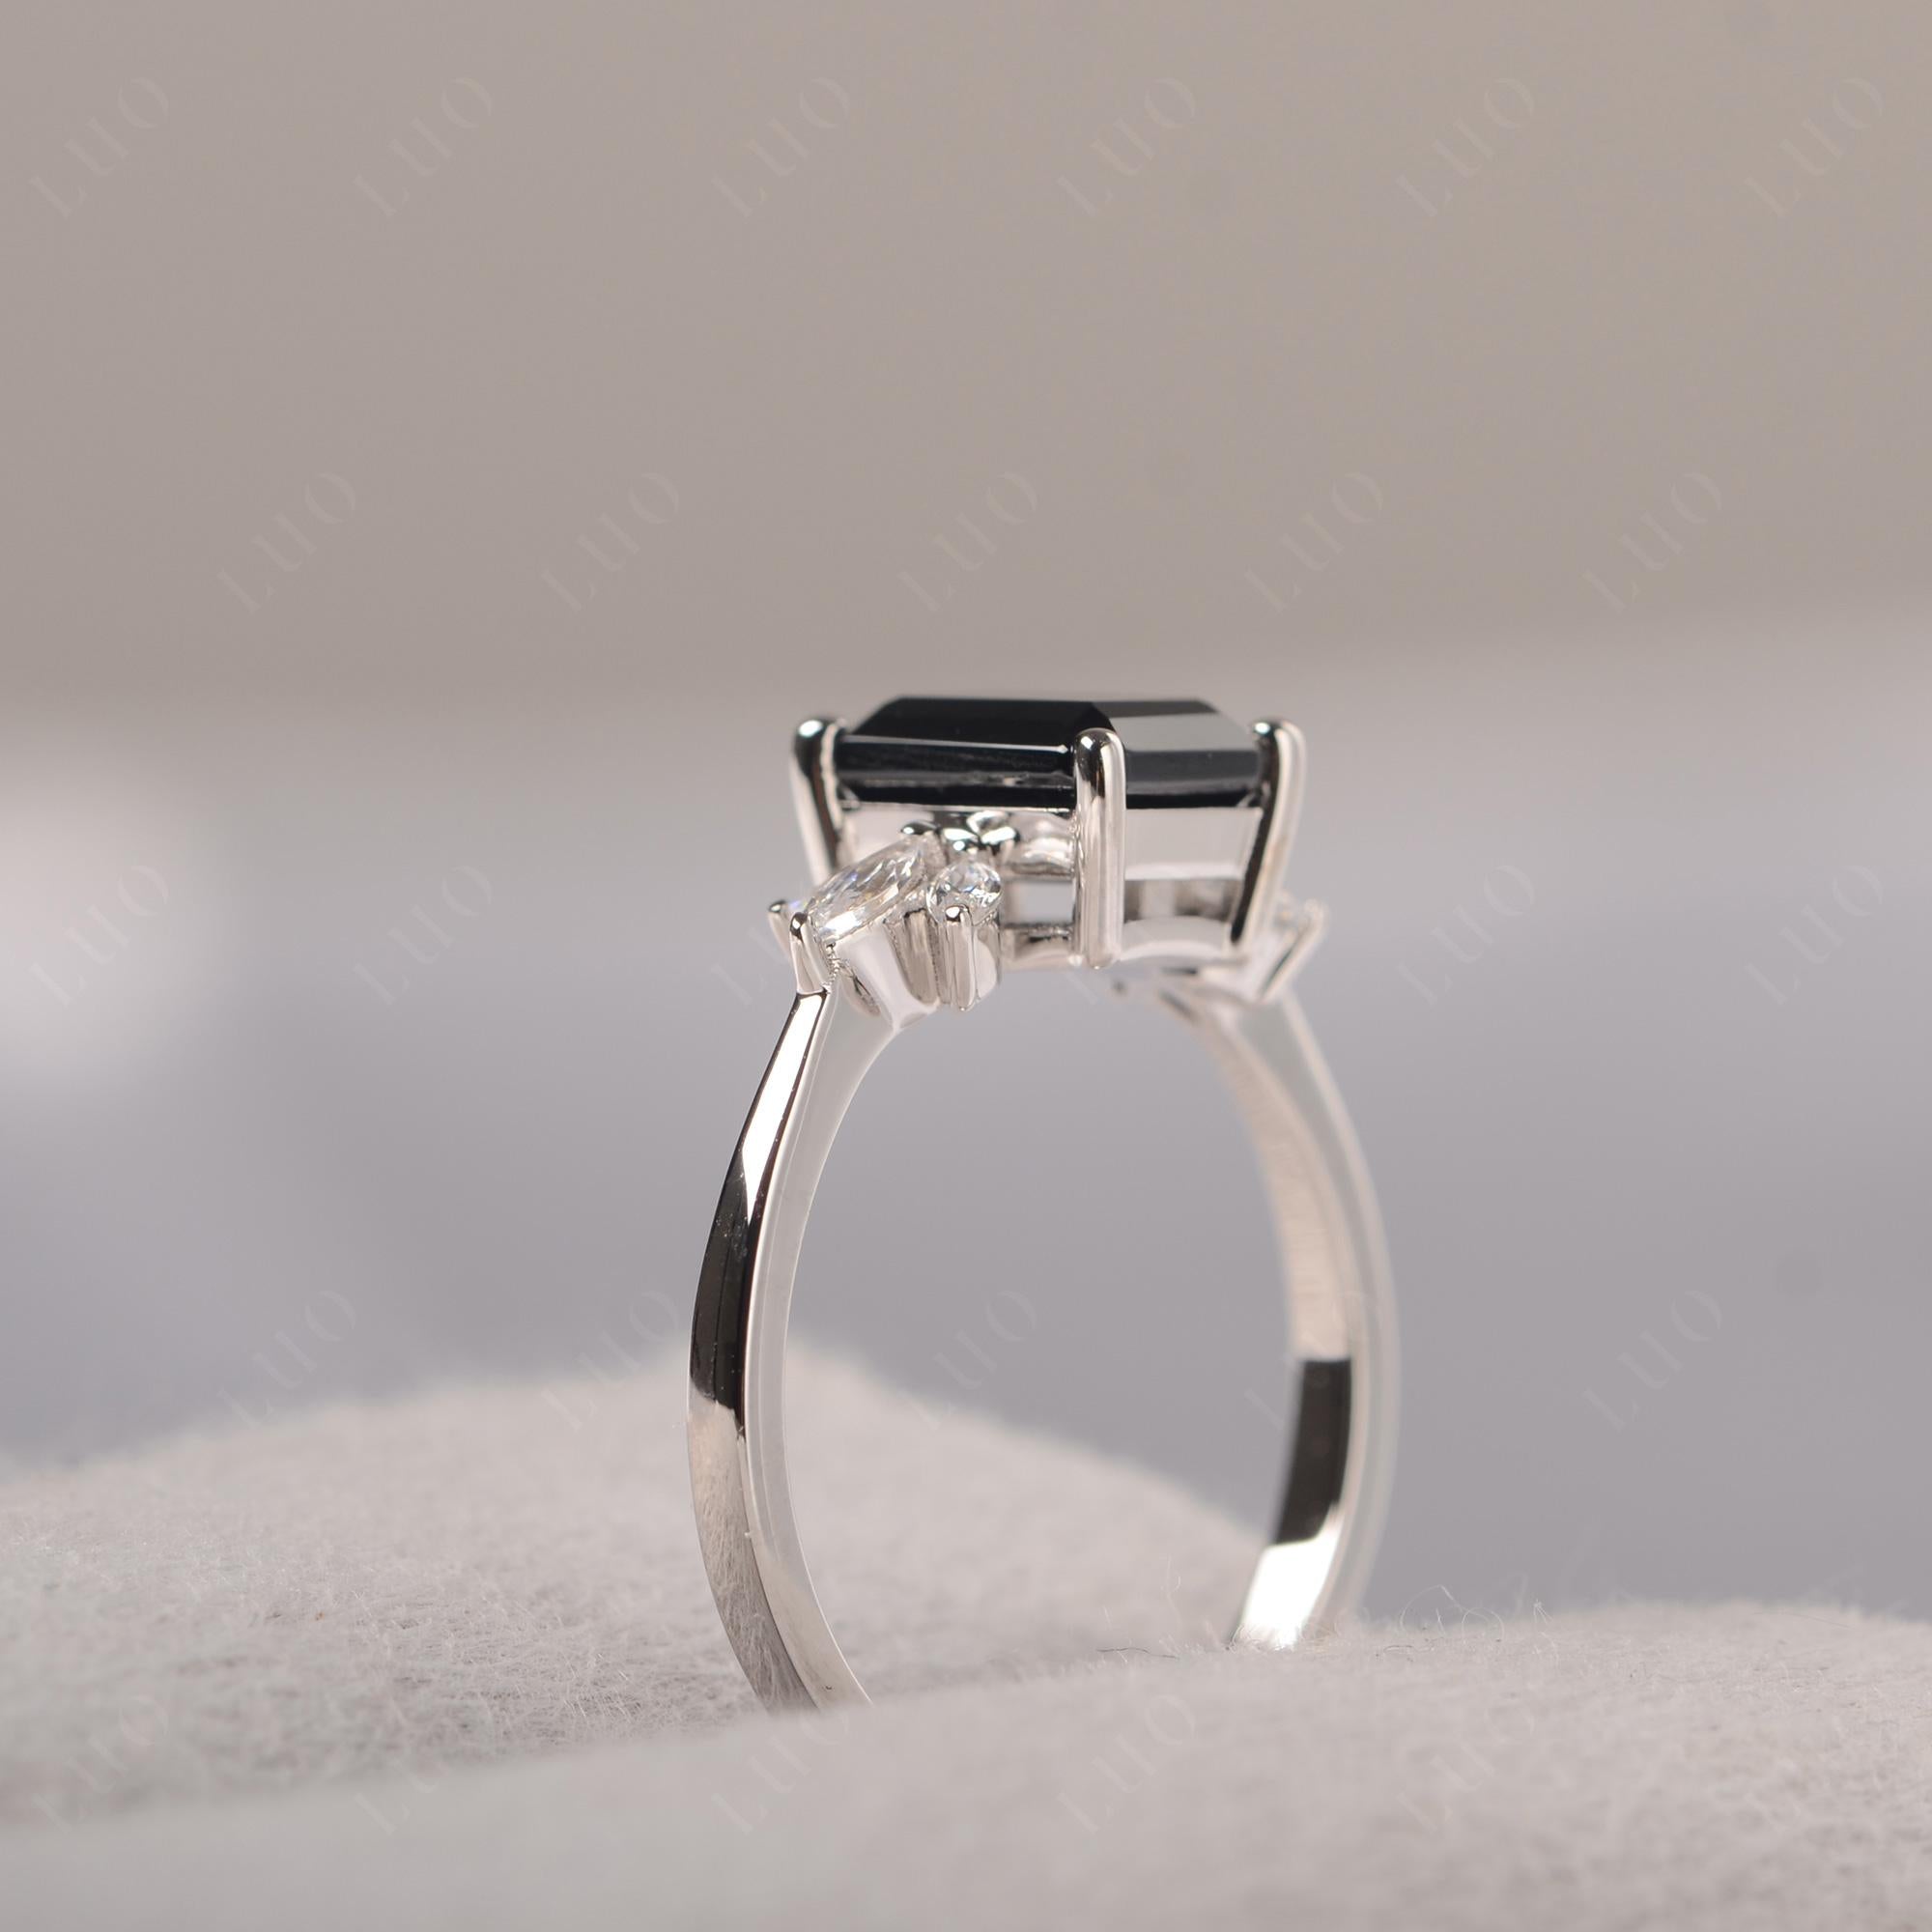 Black Spinel Ring Emerald Cut Wedding Ring - LUO Jewelry